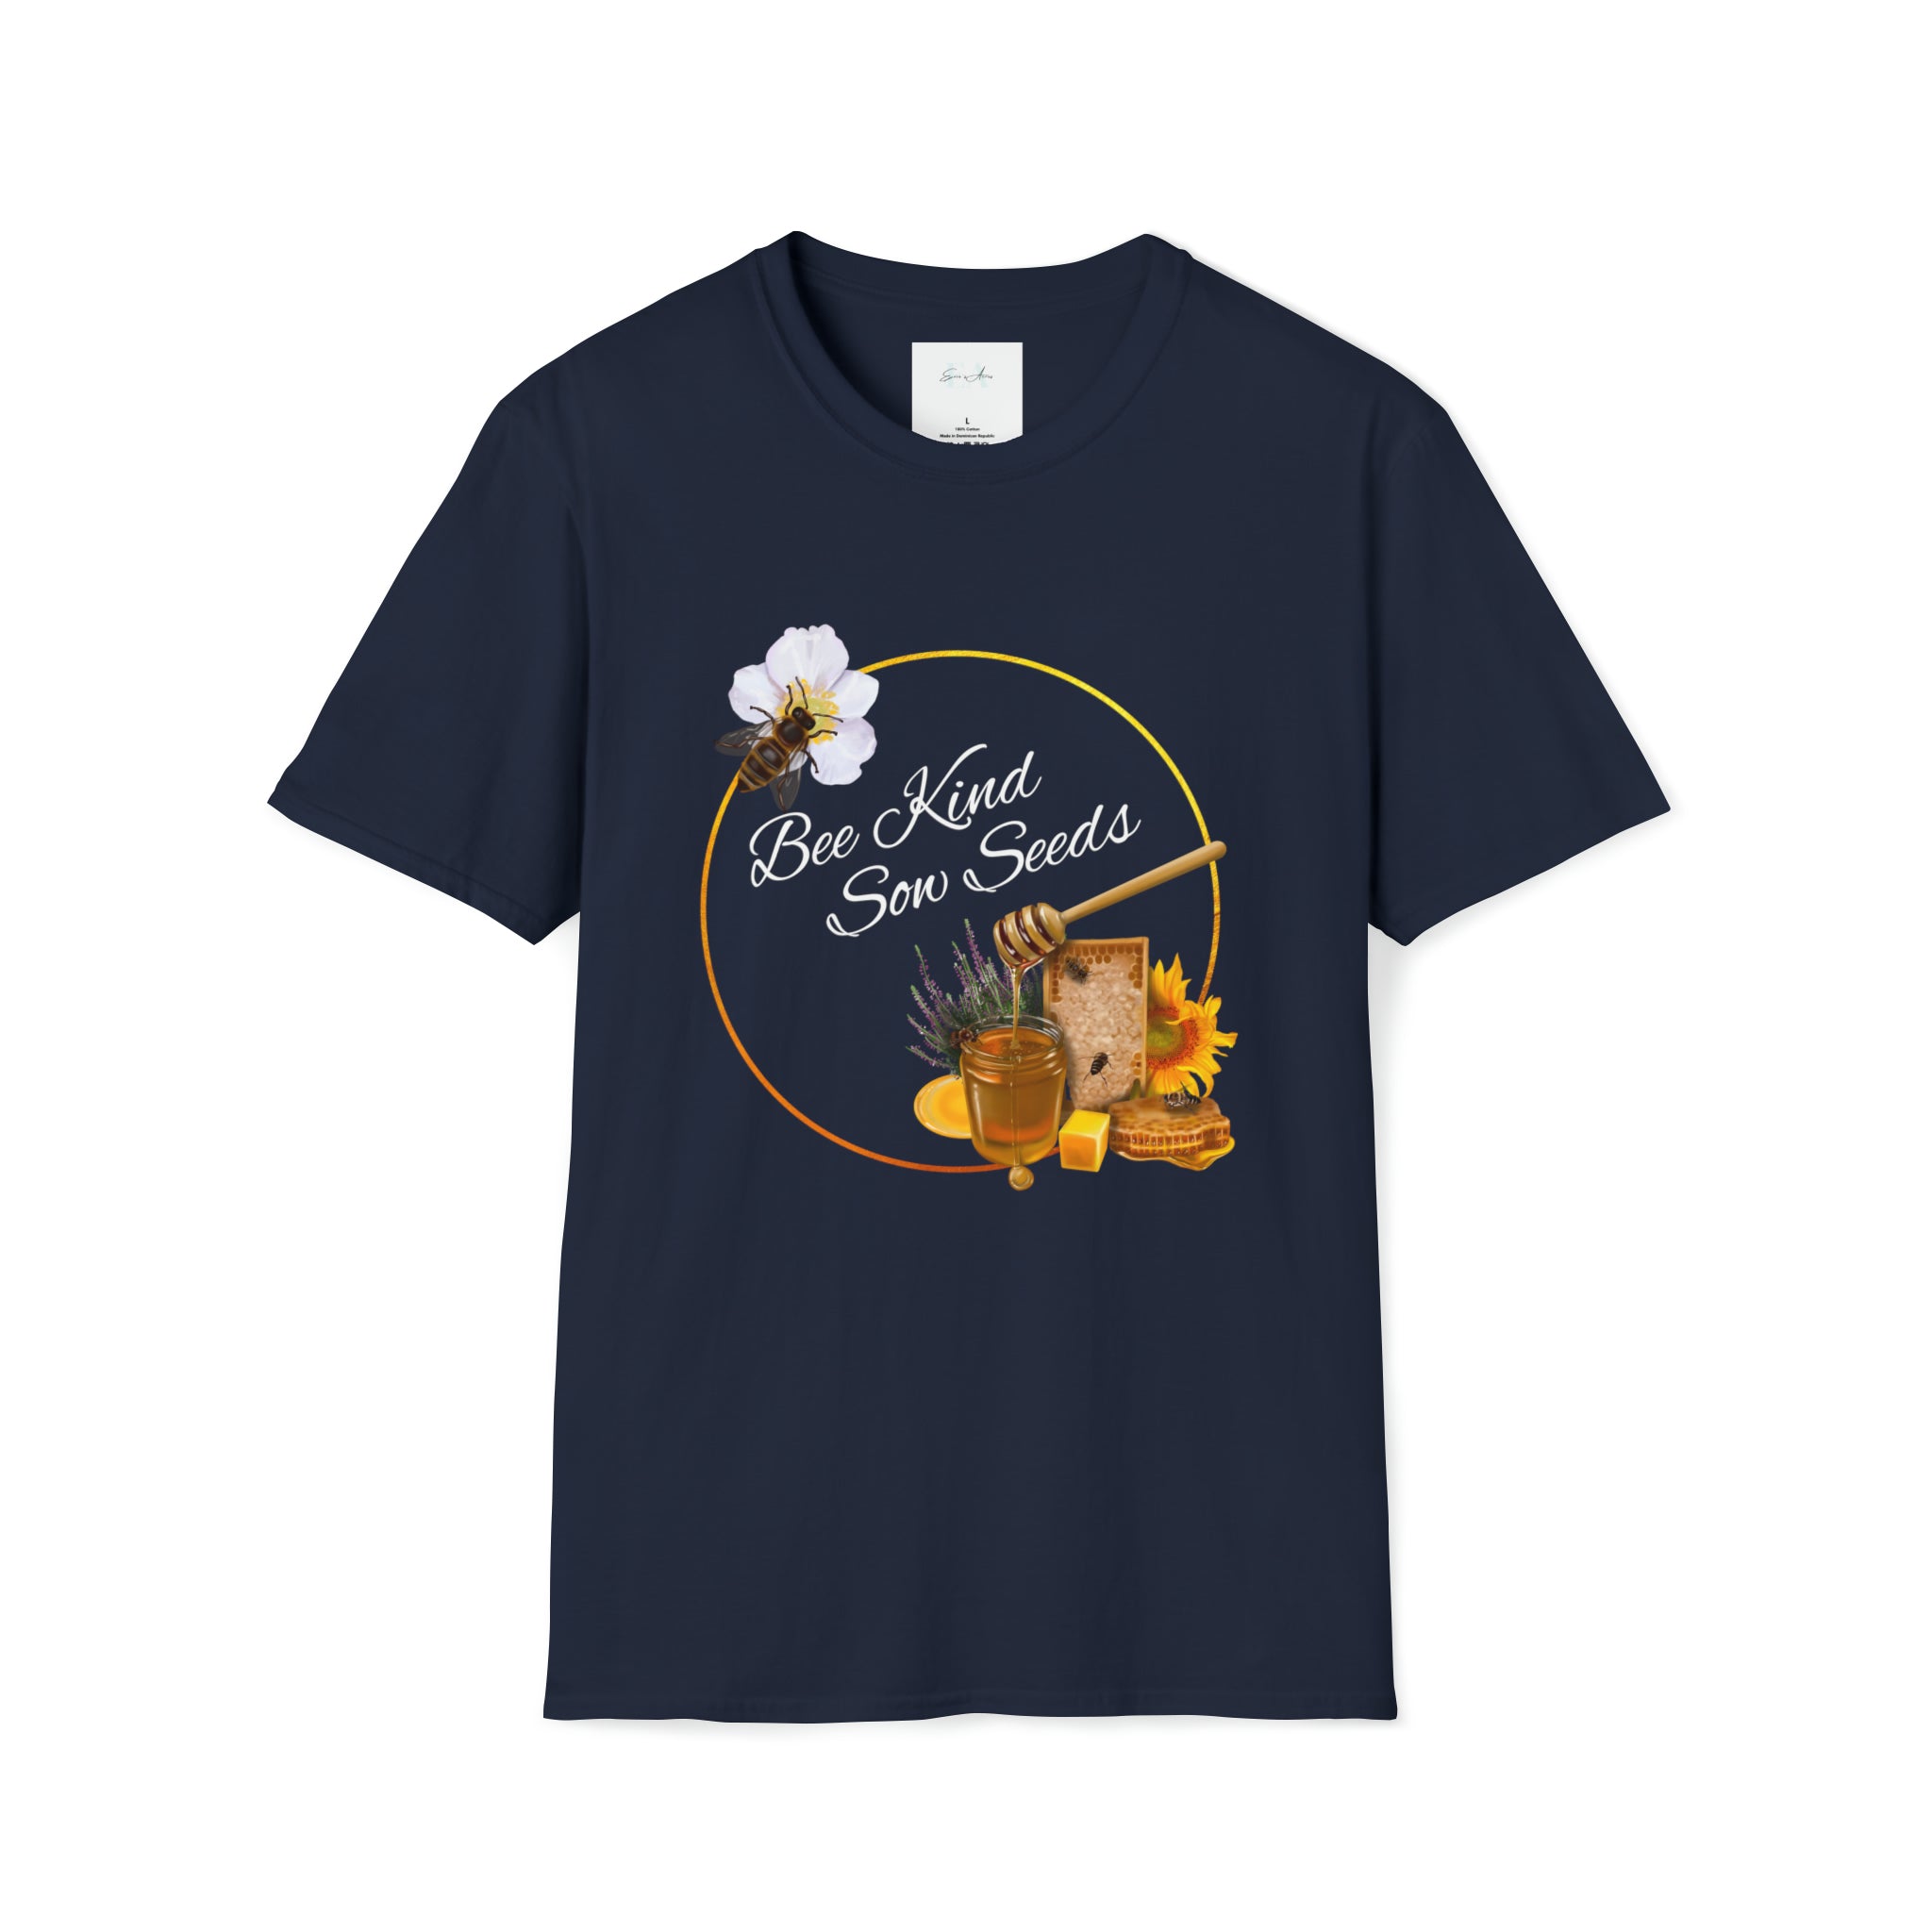 Bee Kind Sow Seeds in white text on navy shirt with honey, a bee, and a golden circle.